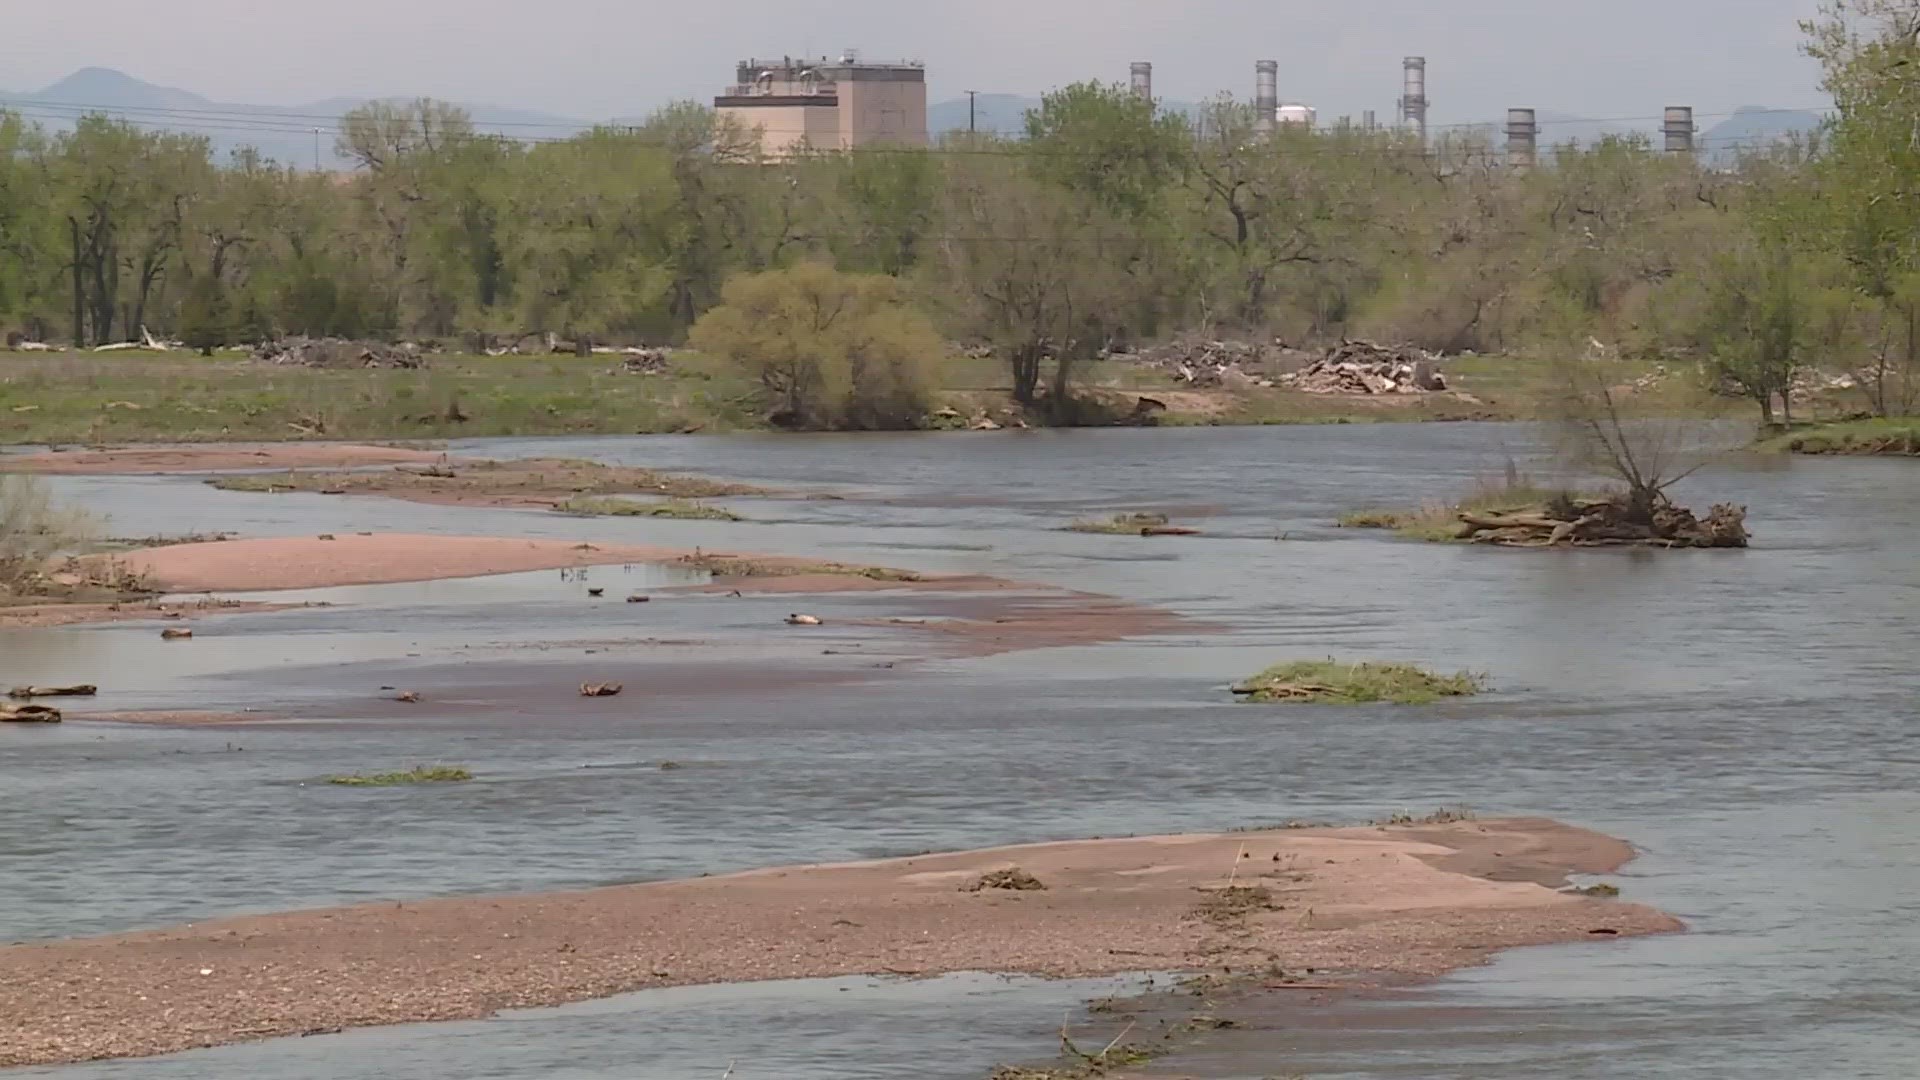 All the recent rain and snowmelt has put so much water into the South Platte River.